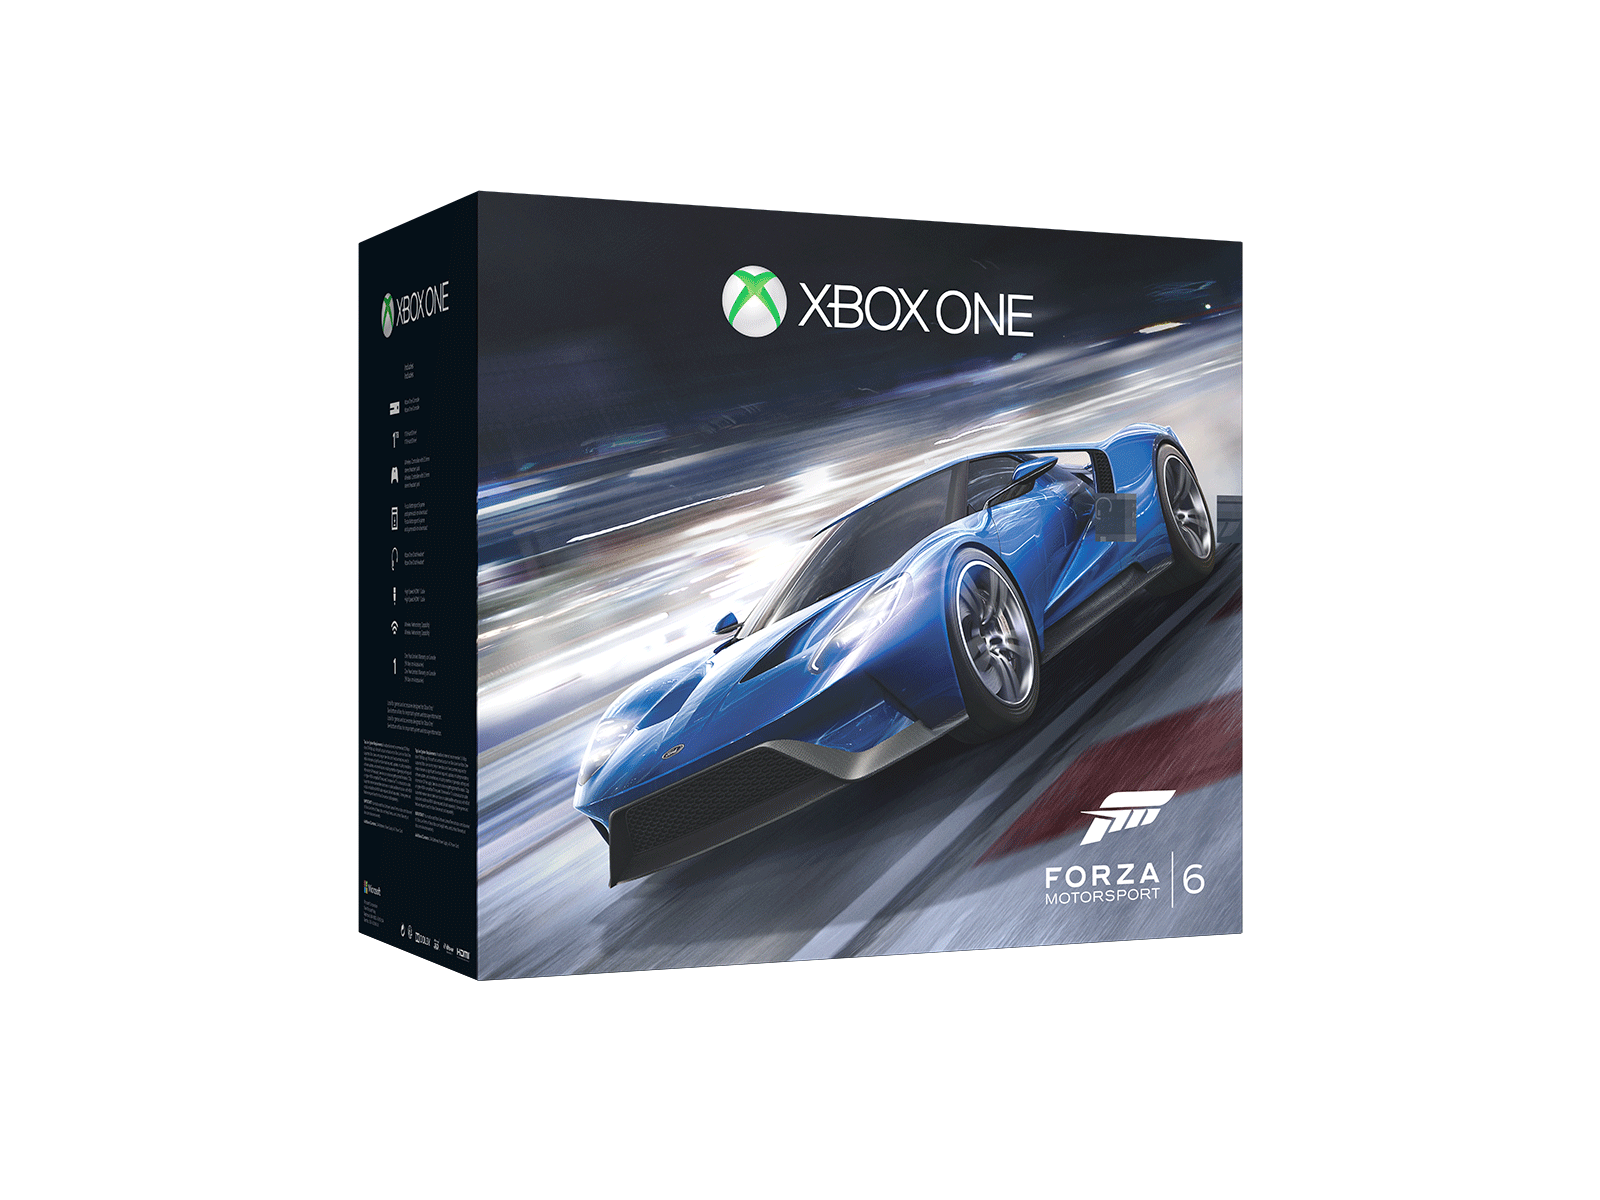 Limited Edition Forza Motorsport 6 Xbox One Now Available for Pre